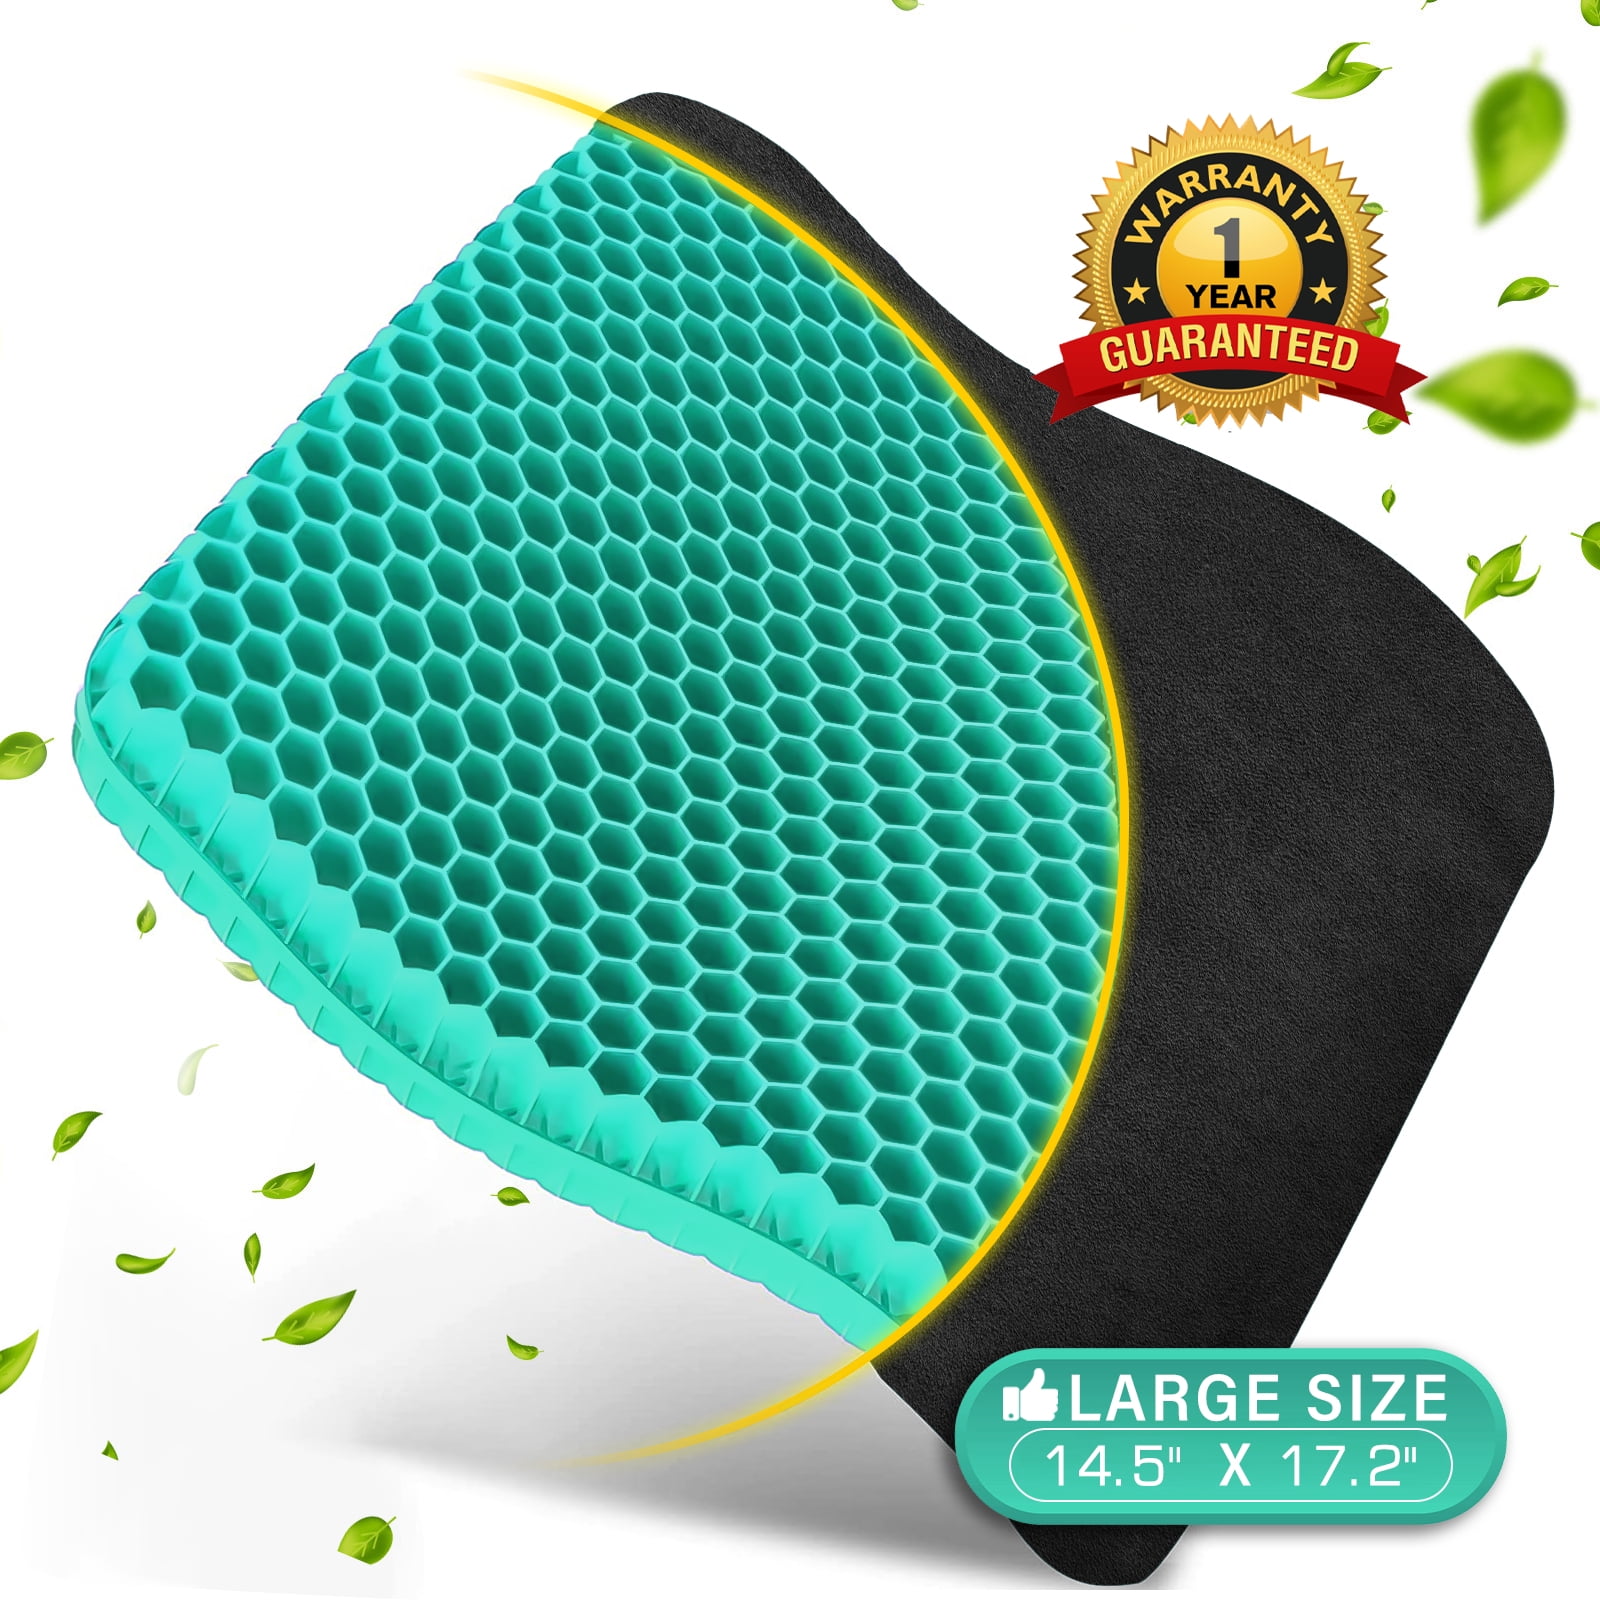 KYSMOTIC Gel Seat Cushion for Long Sitting (Super Large & Thick), Soft &  Breathable, Gel Chair Cushion for Wheelchair, for Hip Pain, Gel Seat  Cushion